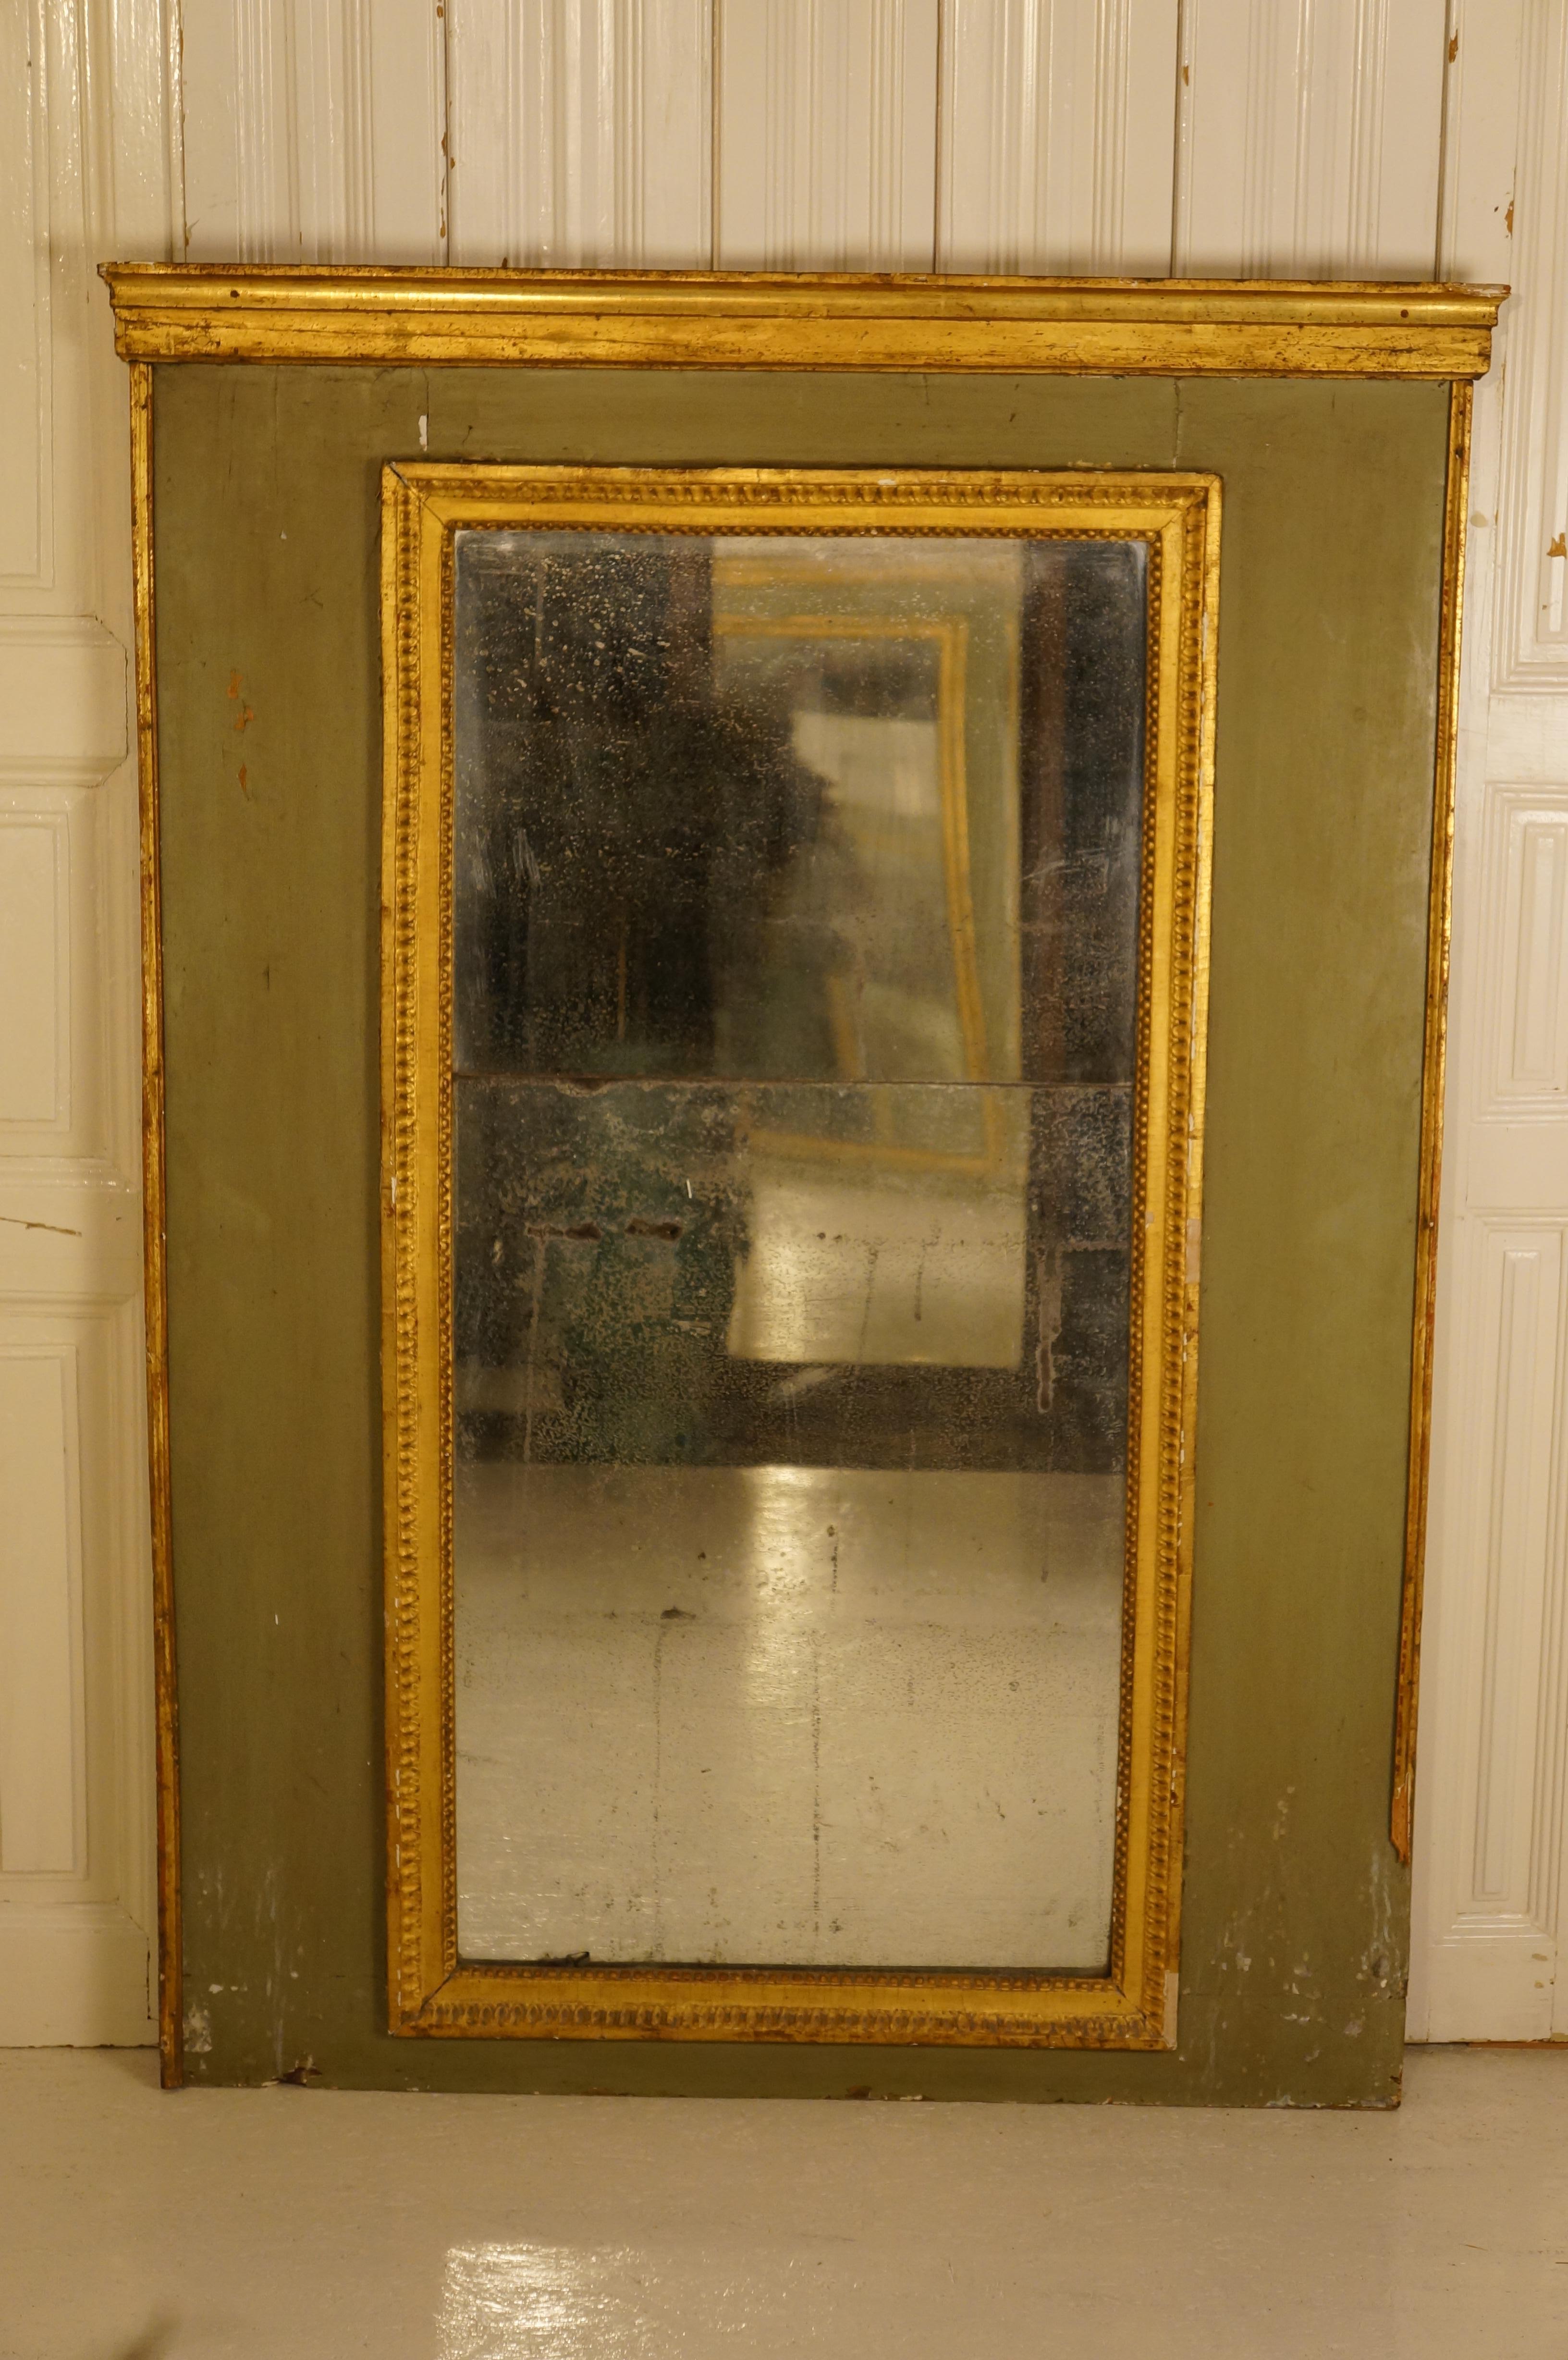 Who knows where this 19th century French Trumeau mirror once held court? With its original olive patina and gilt wood frame & antique split mirror plate, normally it was positioned over a roaring fire place or parlor. Where will you put it?